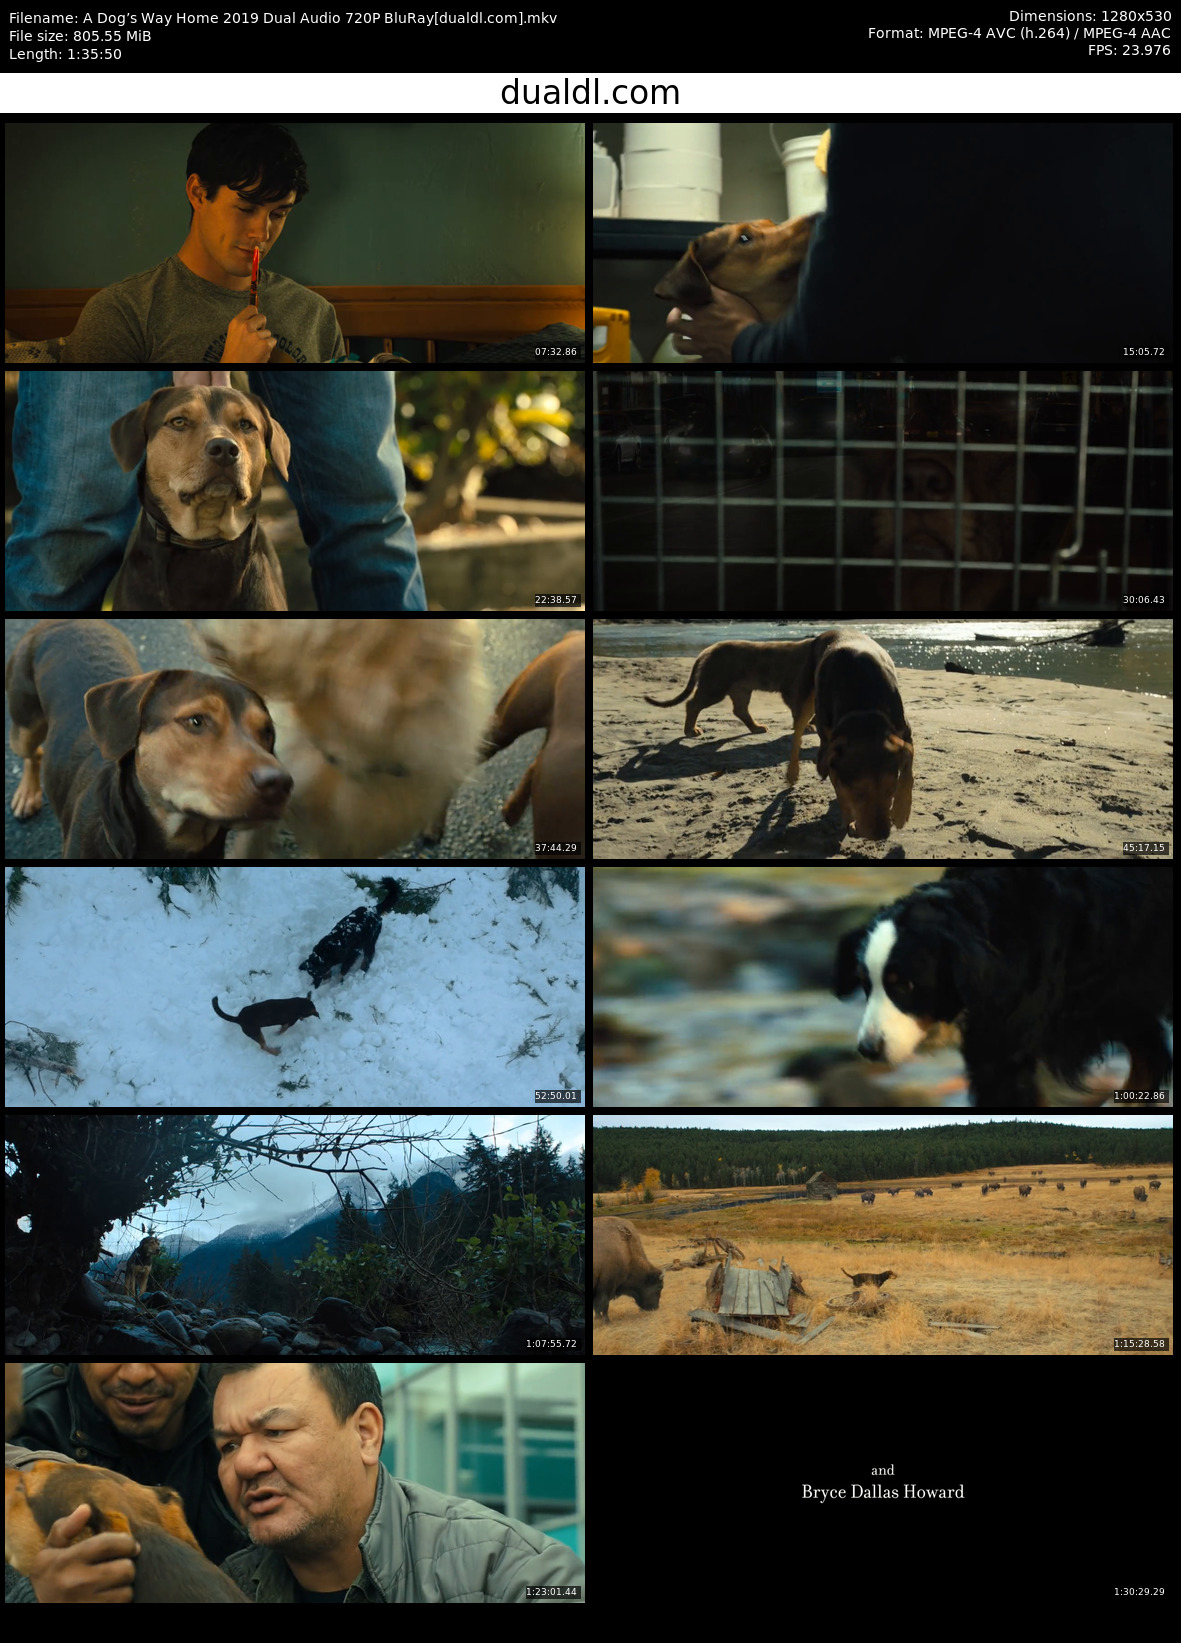 A Dog’s Way Home Full Movie Free in English and Hindi Dubbed HD 720P